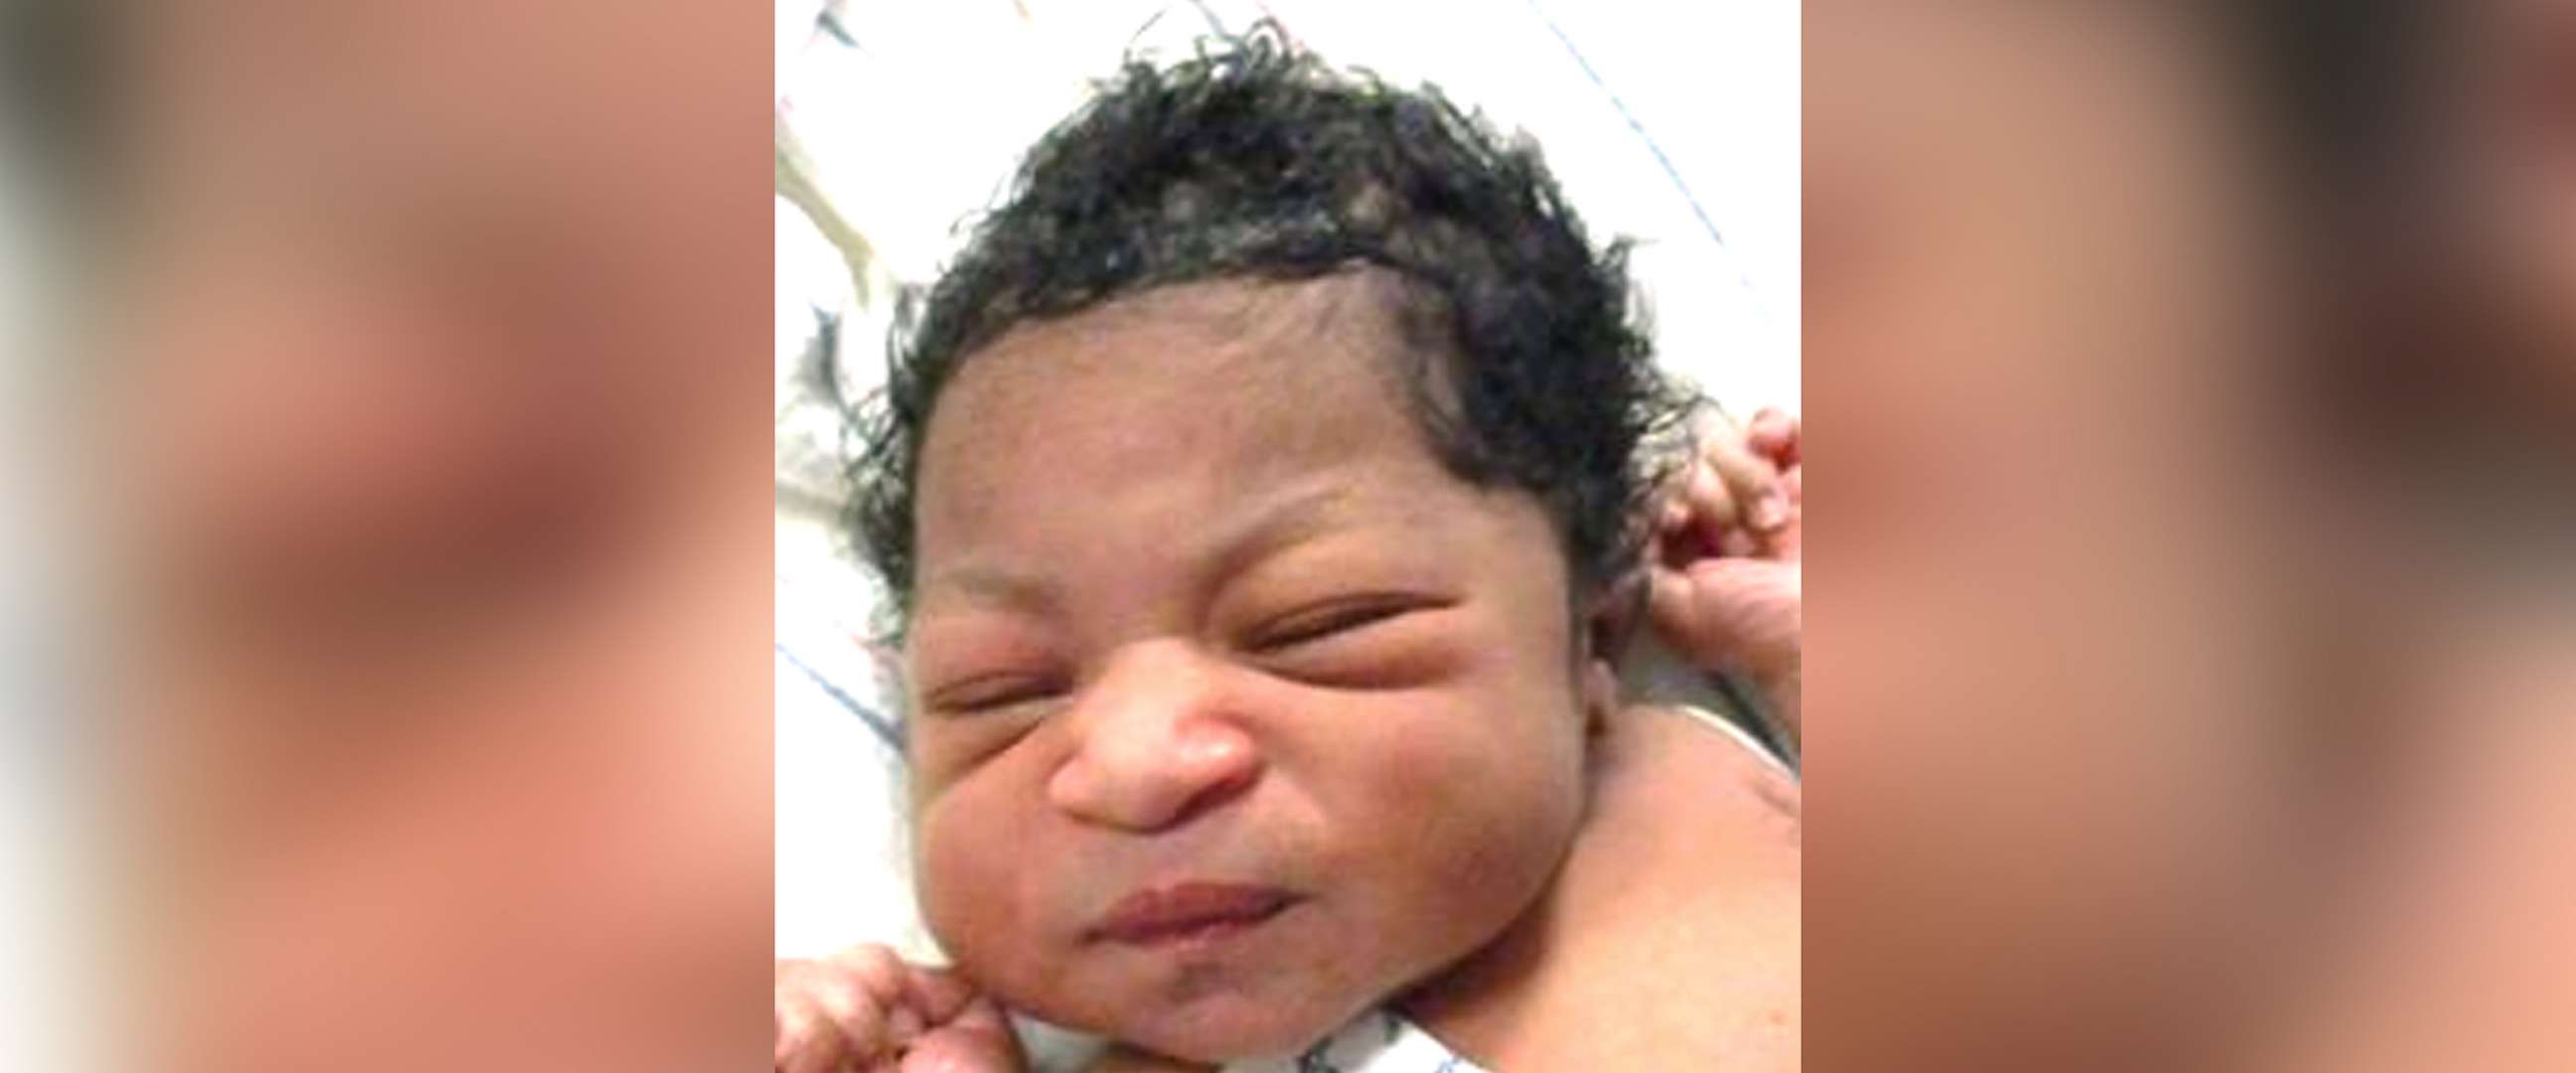 PHOTO: Upper Darby Police are looking for the mom of a newborn found abandoned July 30, 2019.